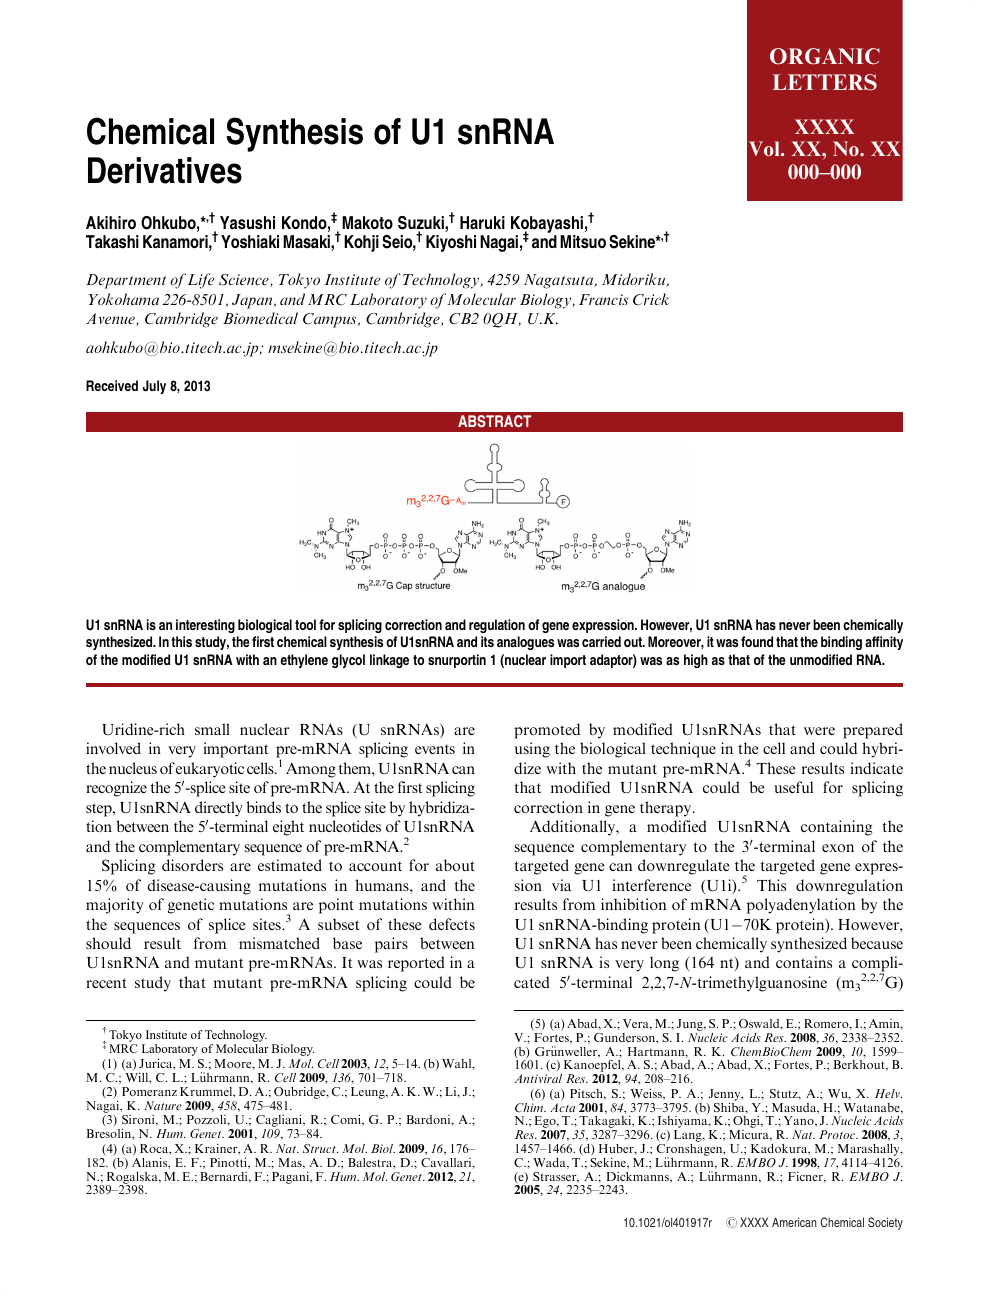 Chemical Synthesis Of U1 Snrna Derivatives Topic Of Research Paper In Chemical Sciences Download Scholarly Article Pdf And Read For Free On Cyberleninka Open Science Hub